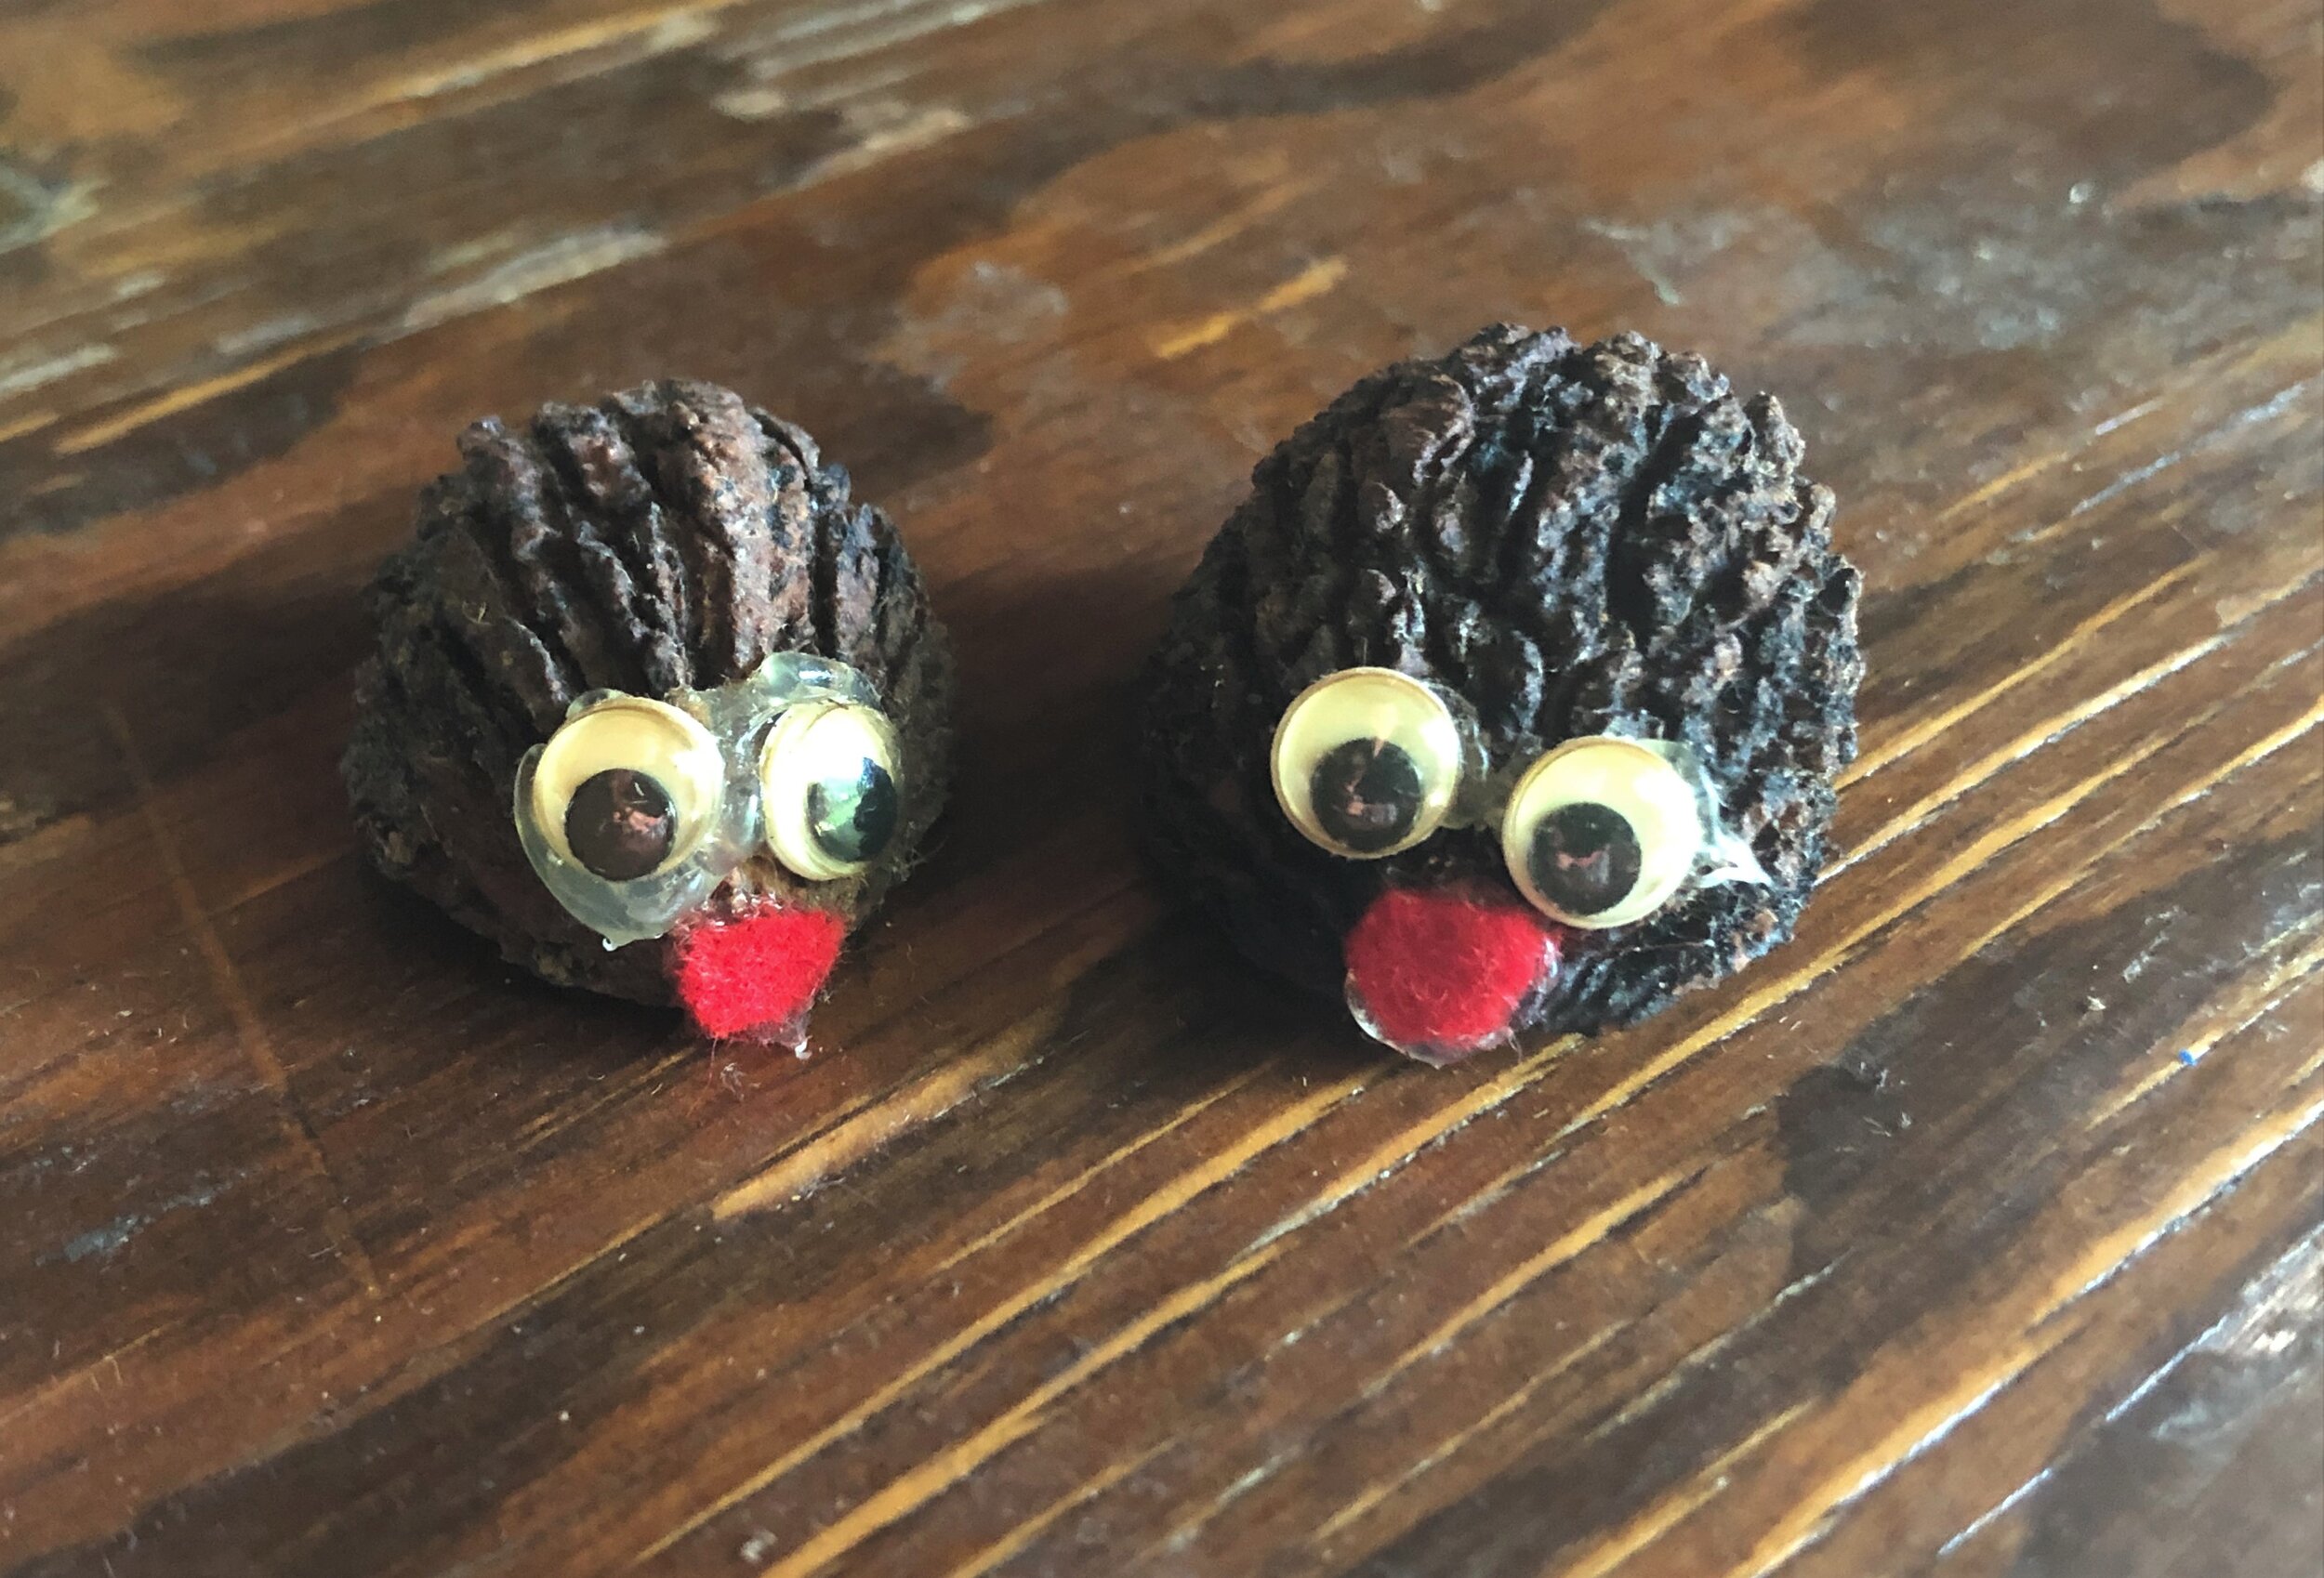 Walnut shells with googly eyes and felt mouths